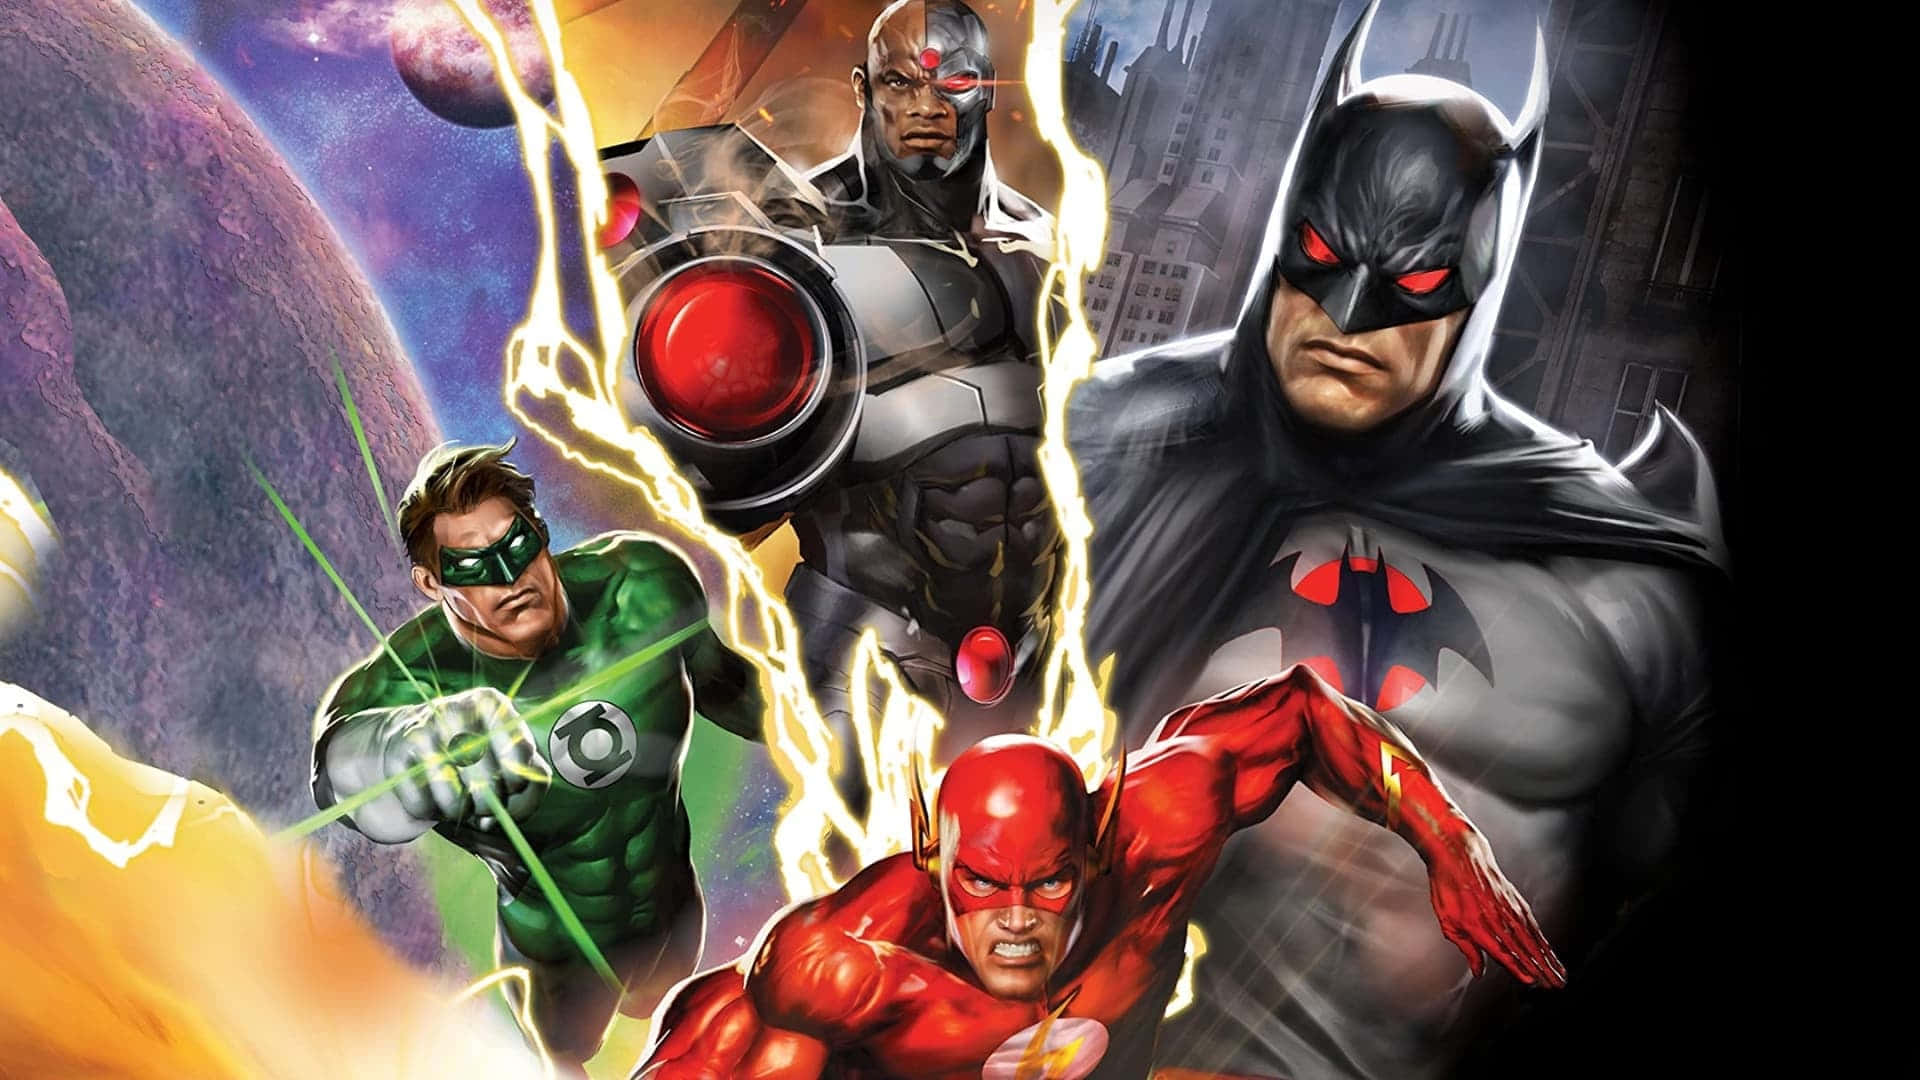 Justice League The Flashpoint Paradox Action Scene Wallpaper